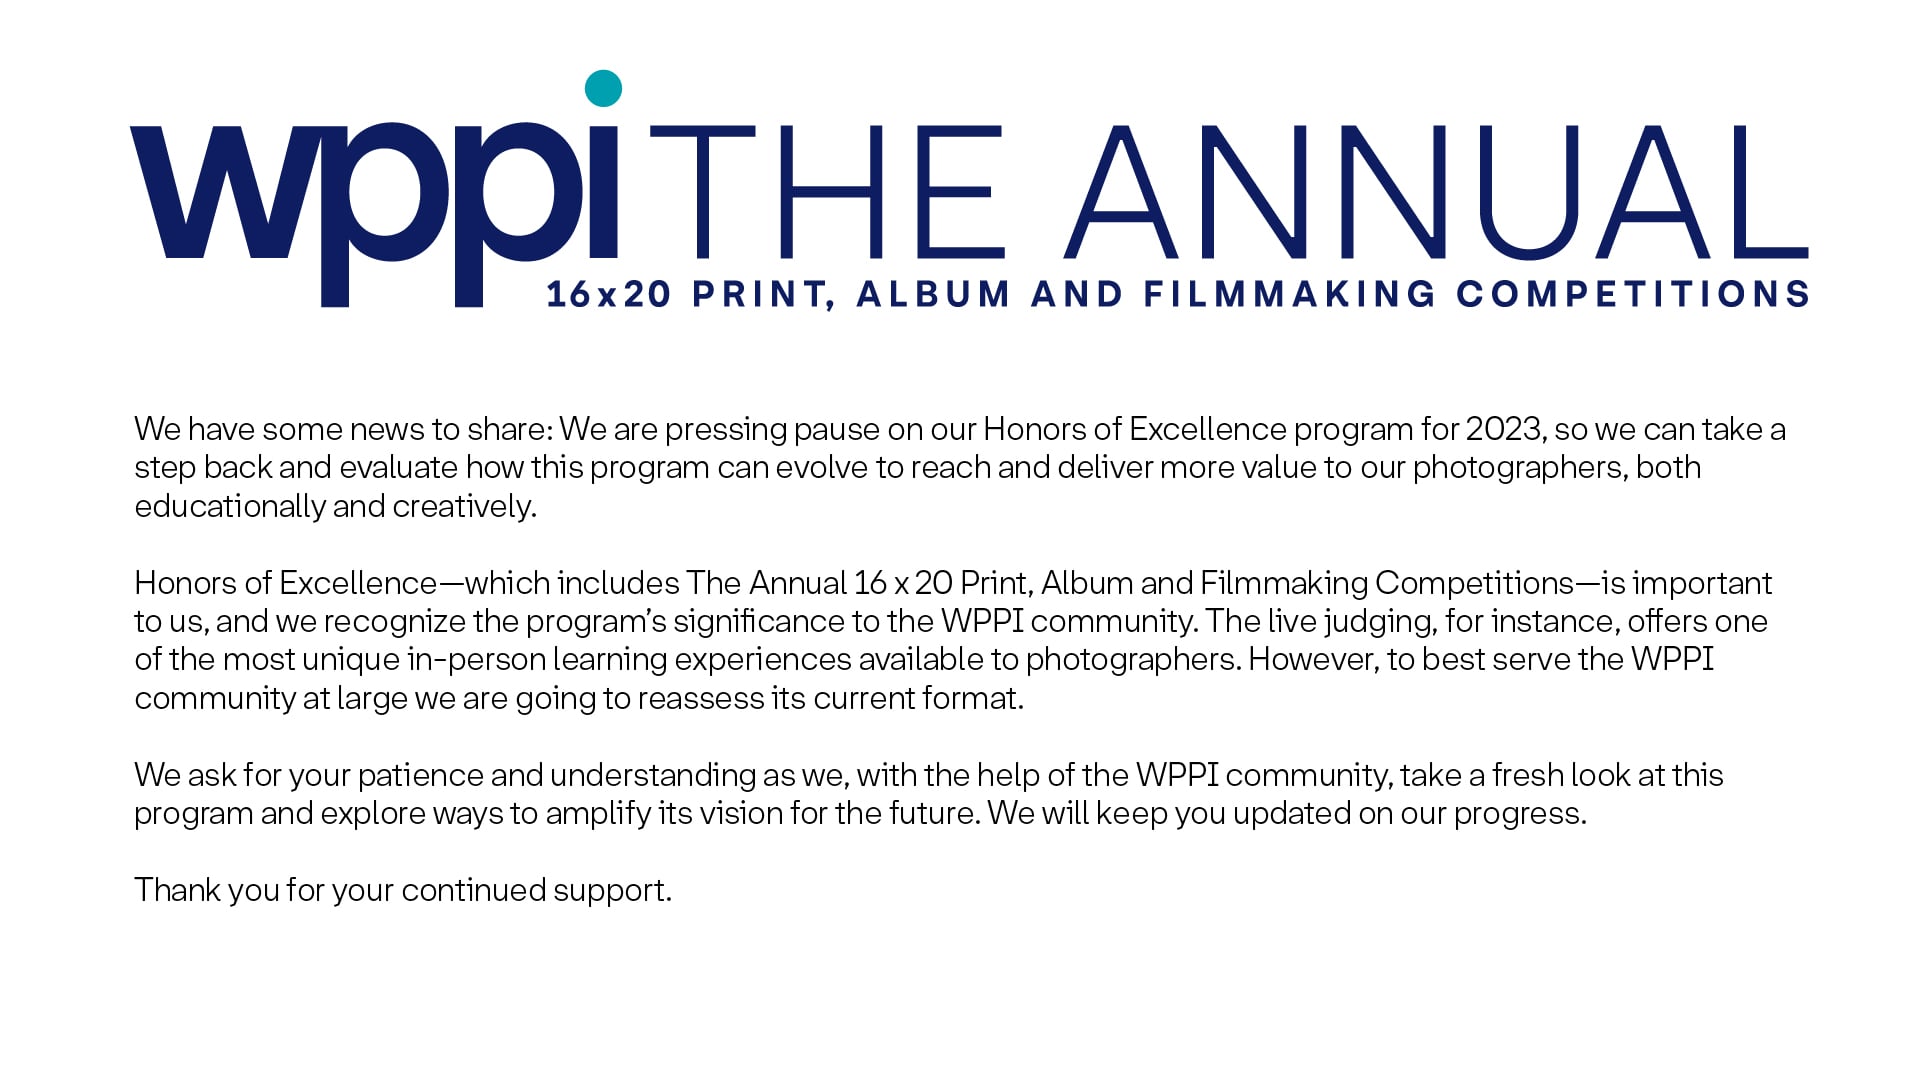 WPPI The Annual 2022 photo pic